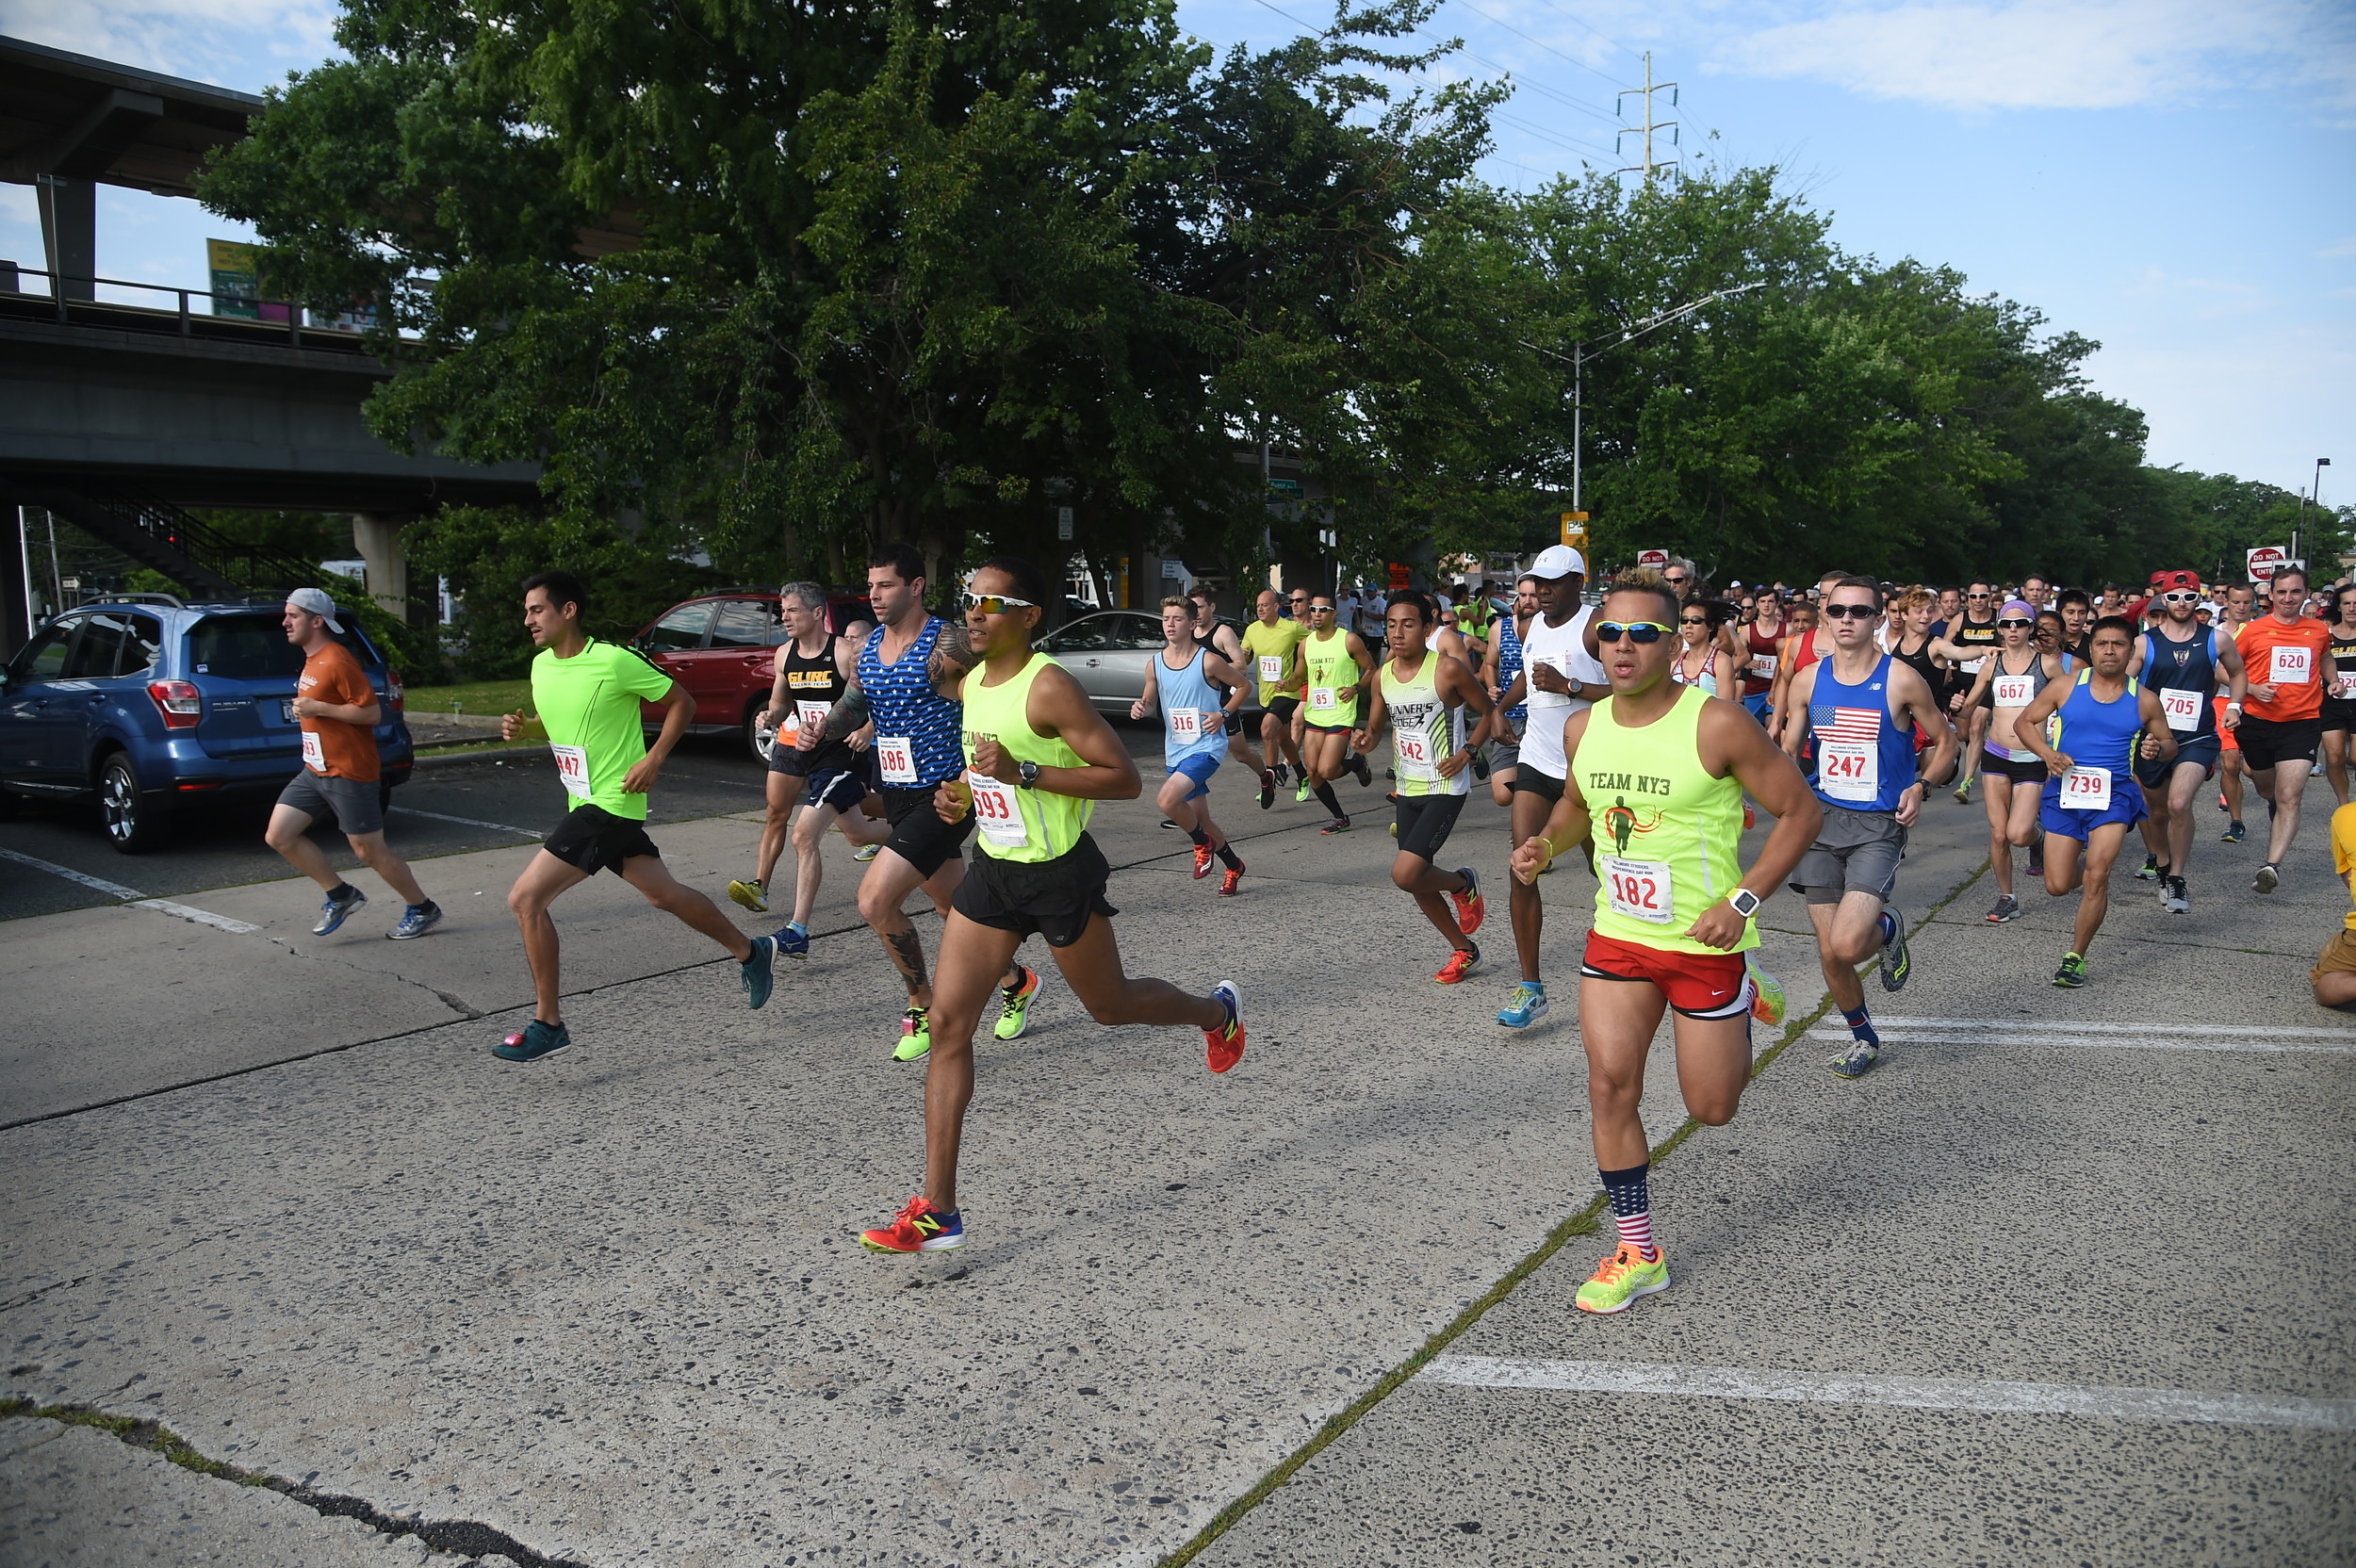 Hundreds of runners from near and far took part in the 35th annual Bellmore Striders Independence Day run.